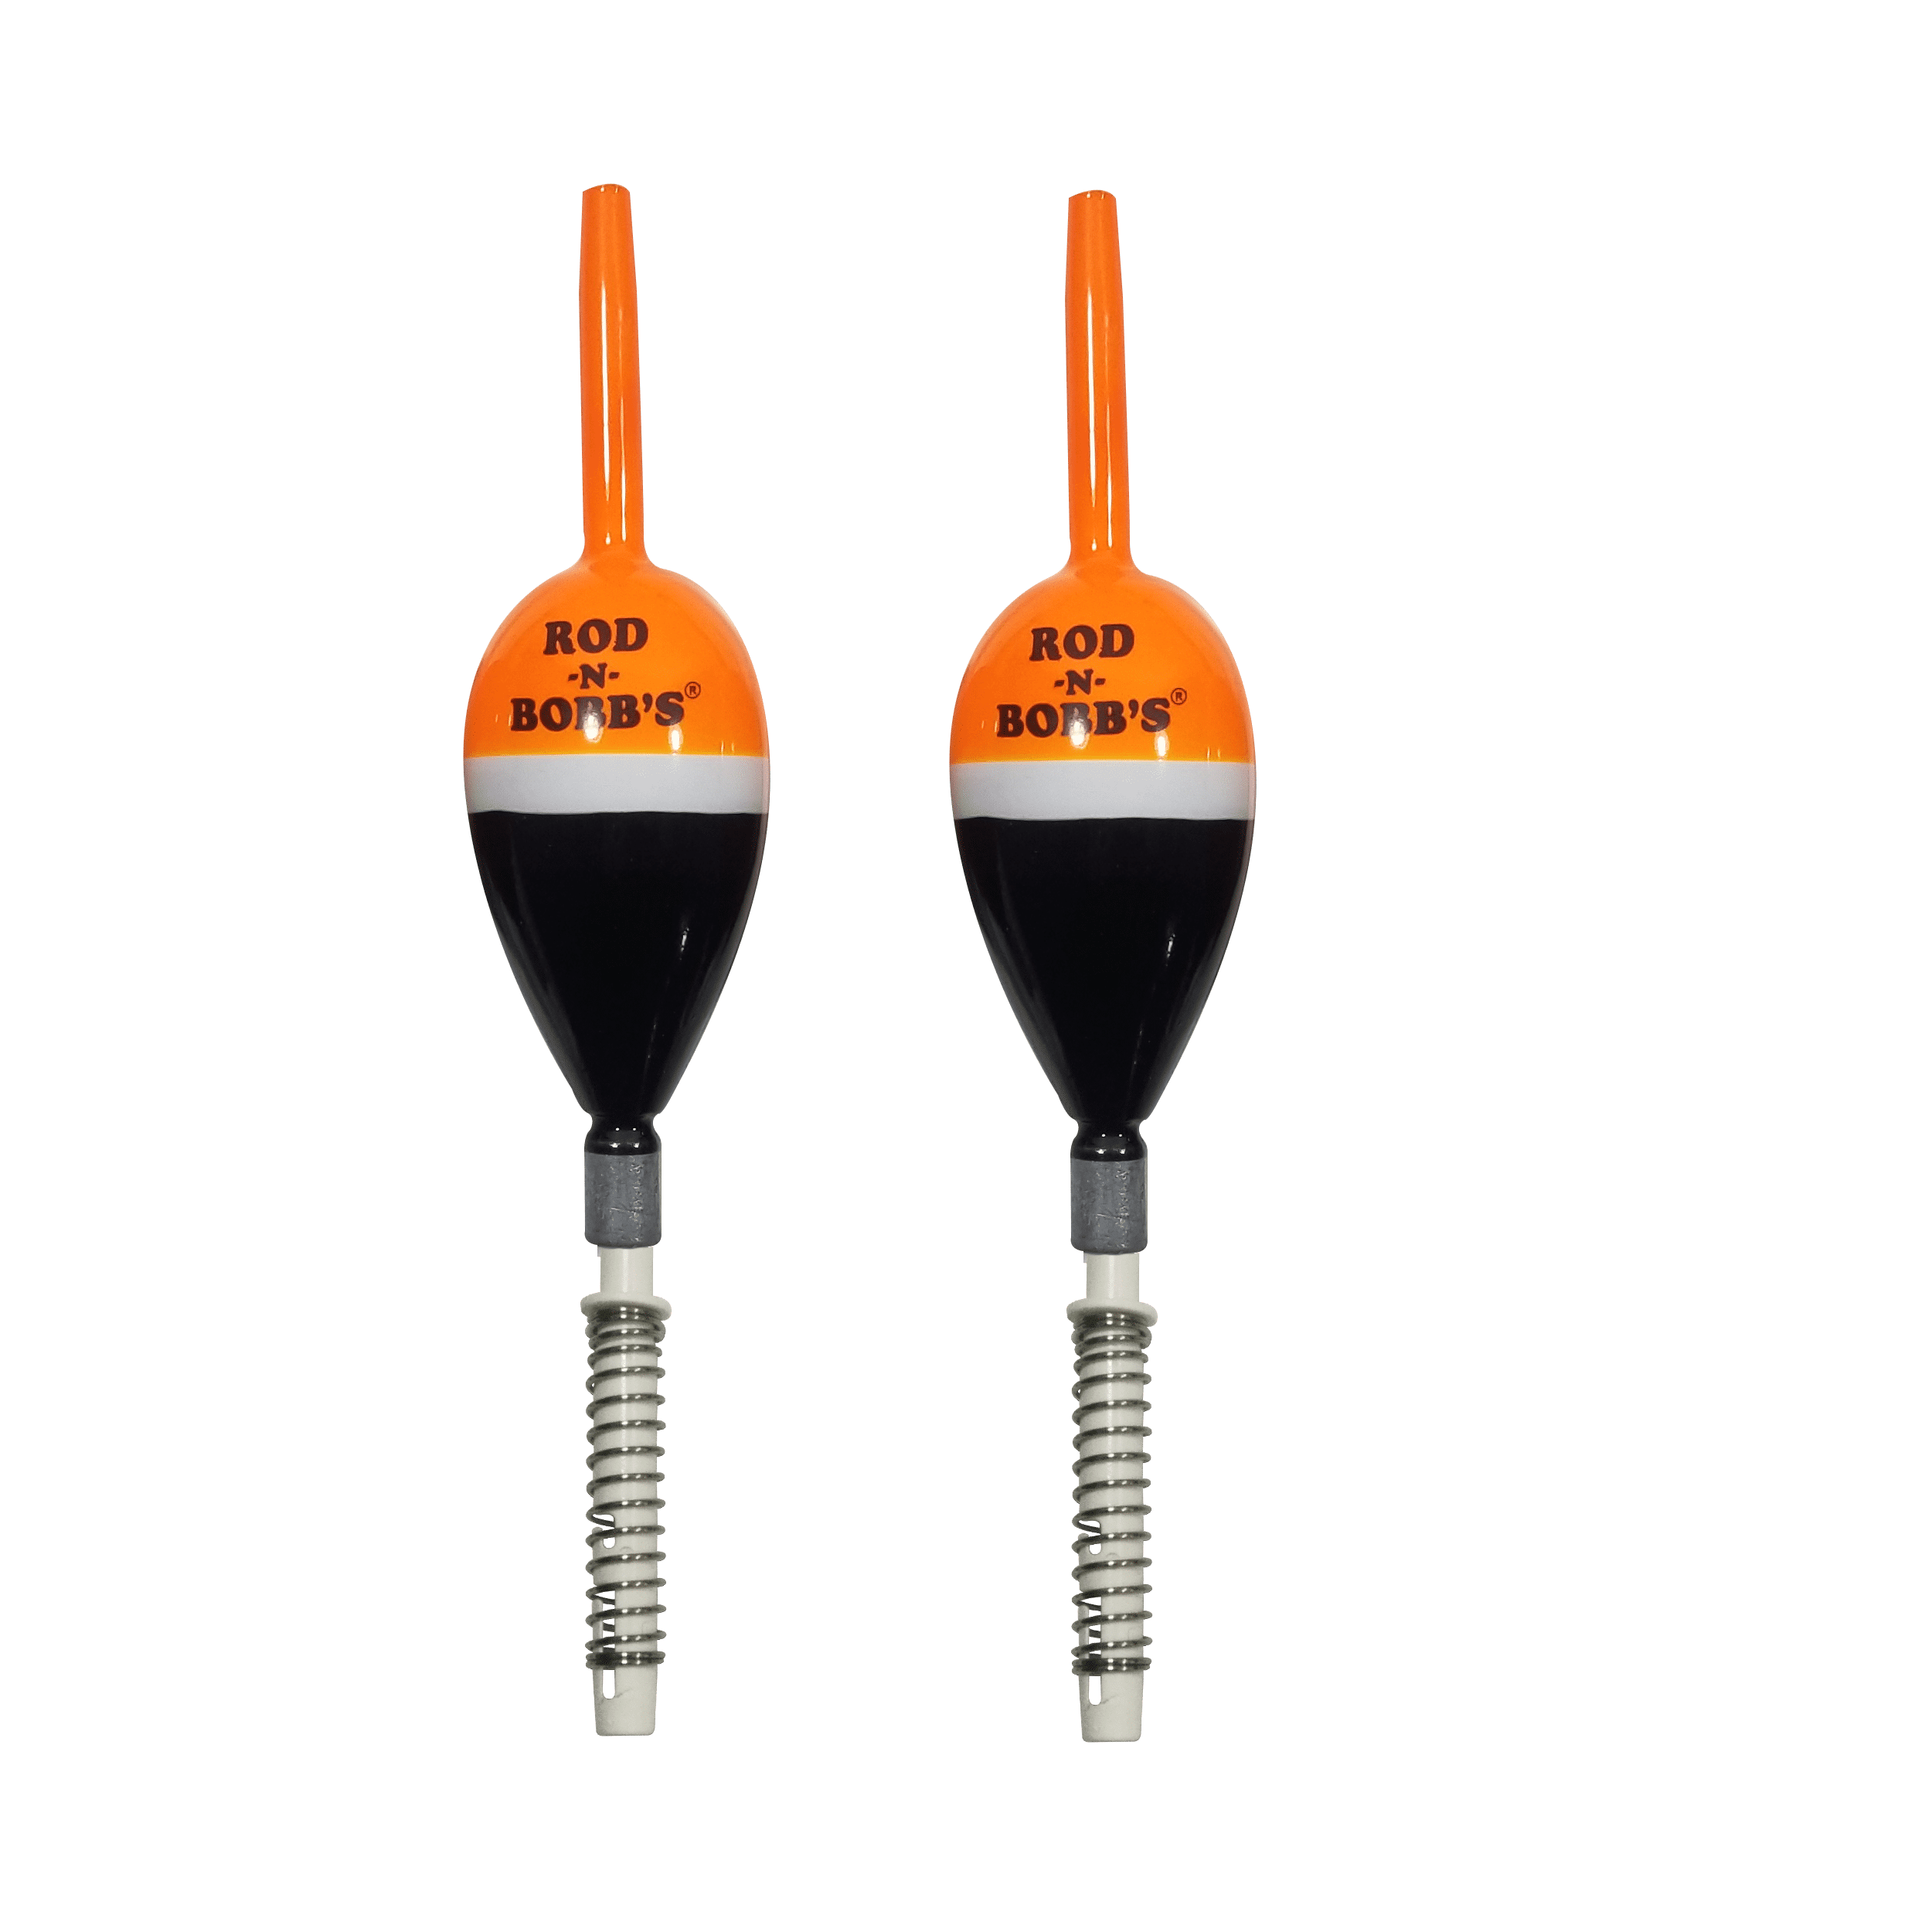 Rod-N-Bobb's 3-In-One RevolutionX Weighted Bobber - 1 - 2 Pack